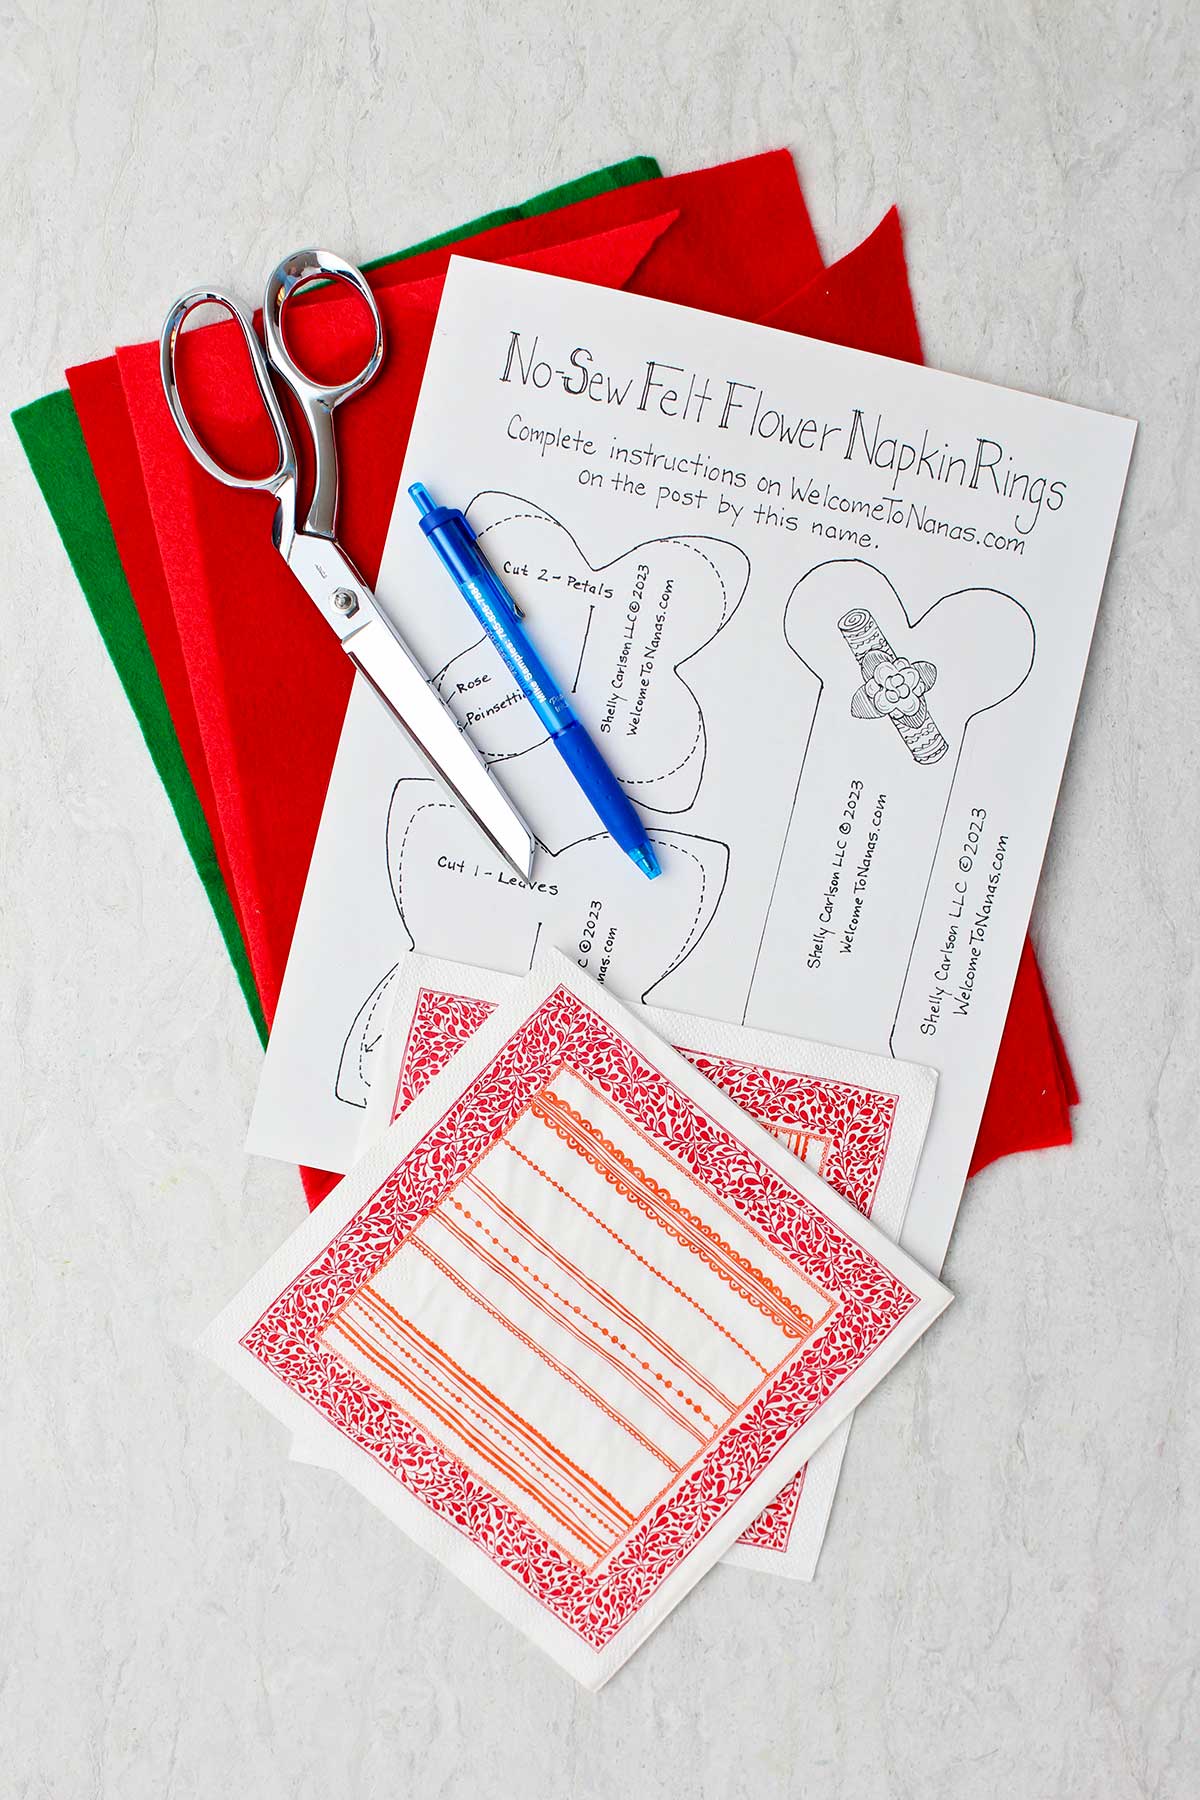 Supplies for a No-Sew Felt Christmas Napkin Ring. Pattern, scissors, pen, napkin and red and green felt.